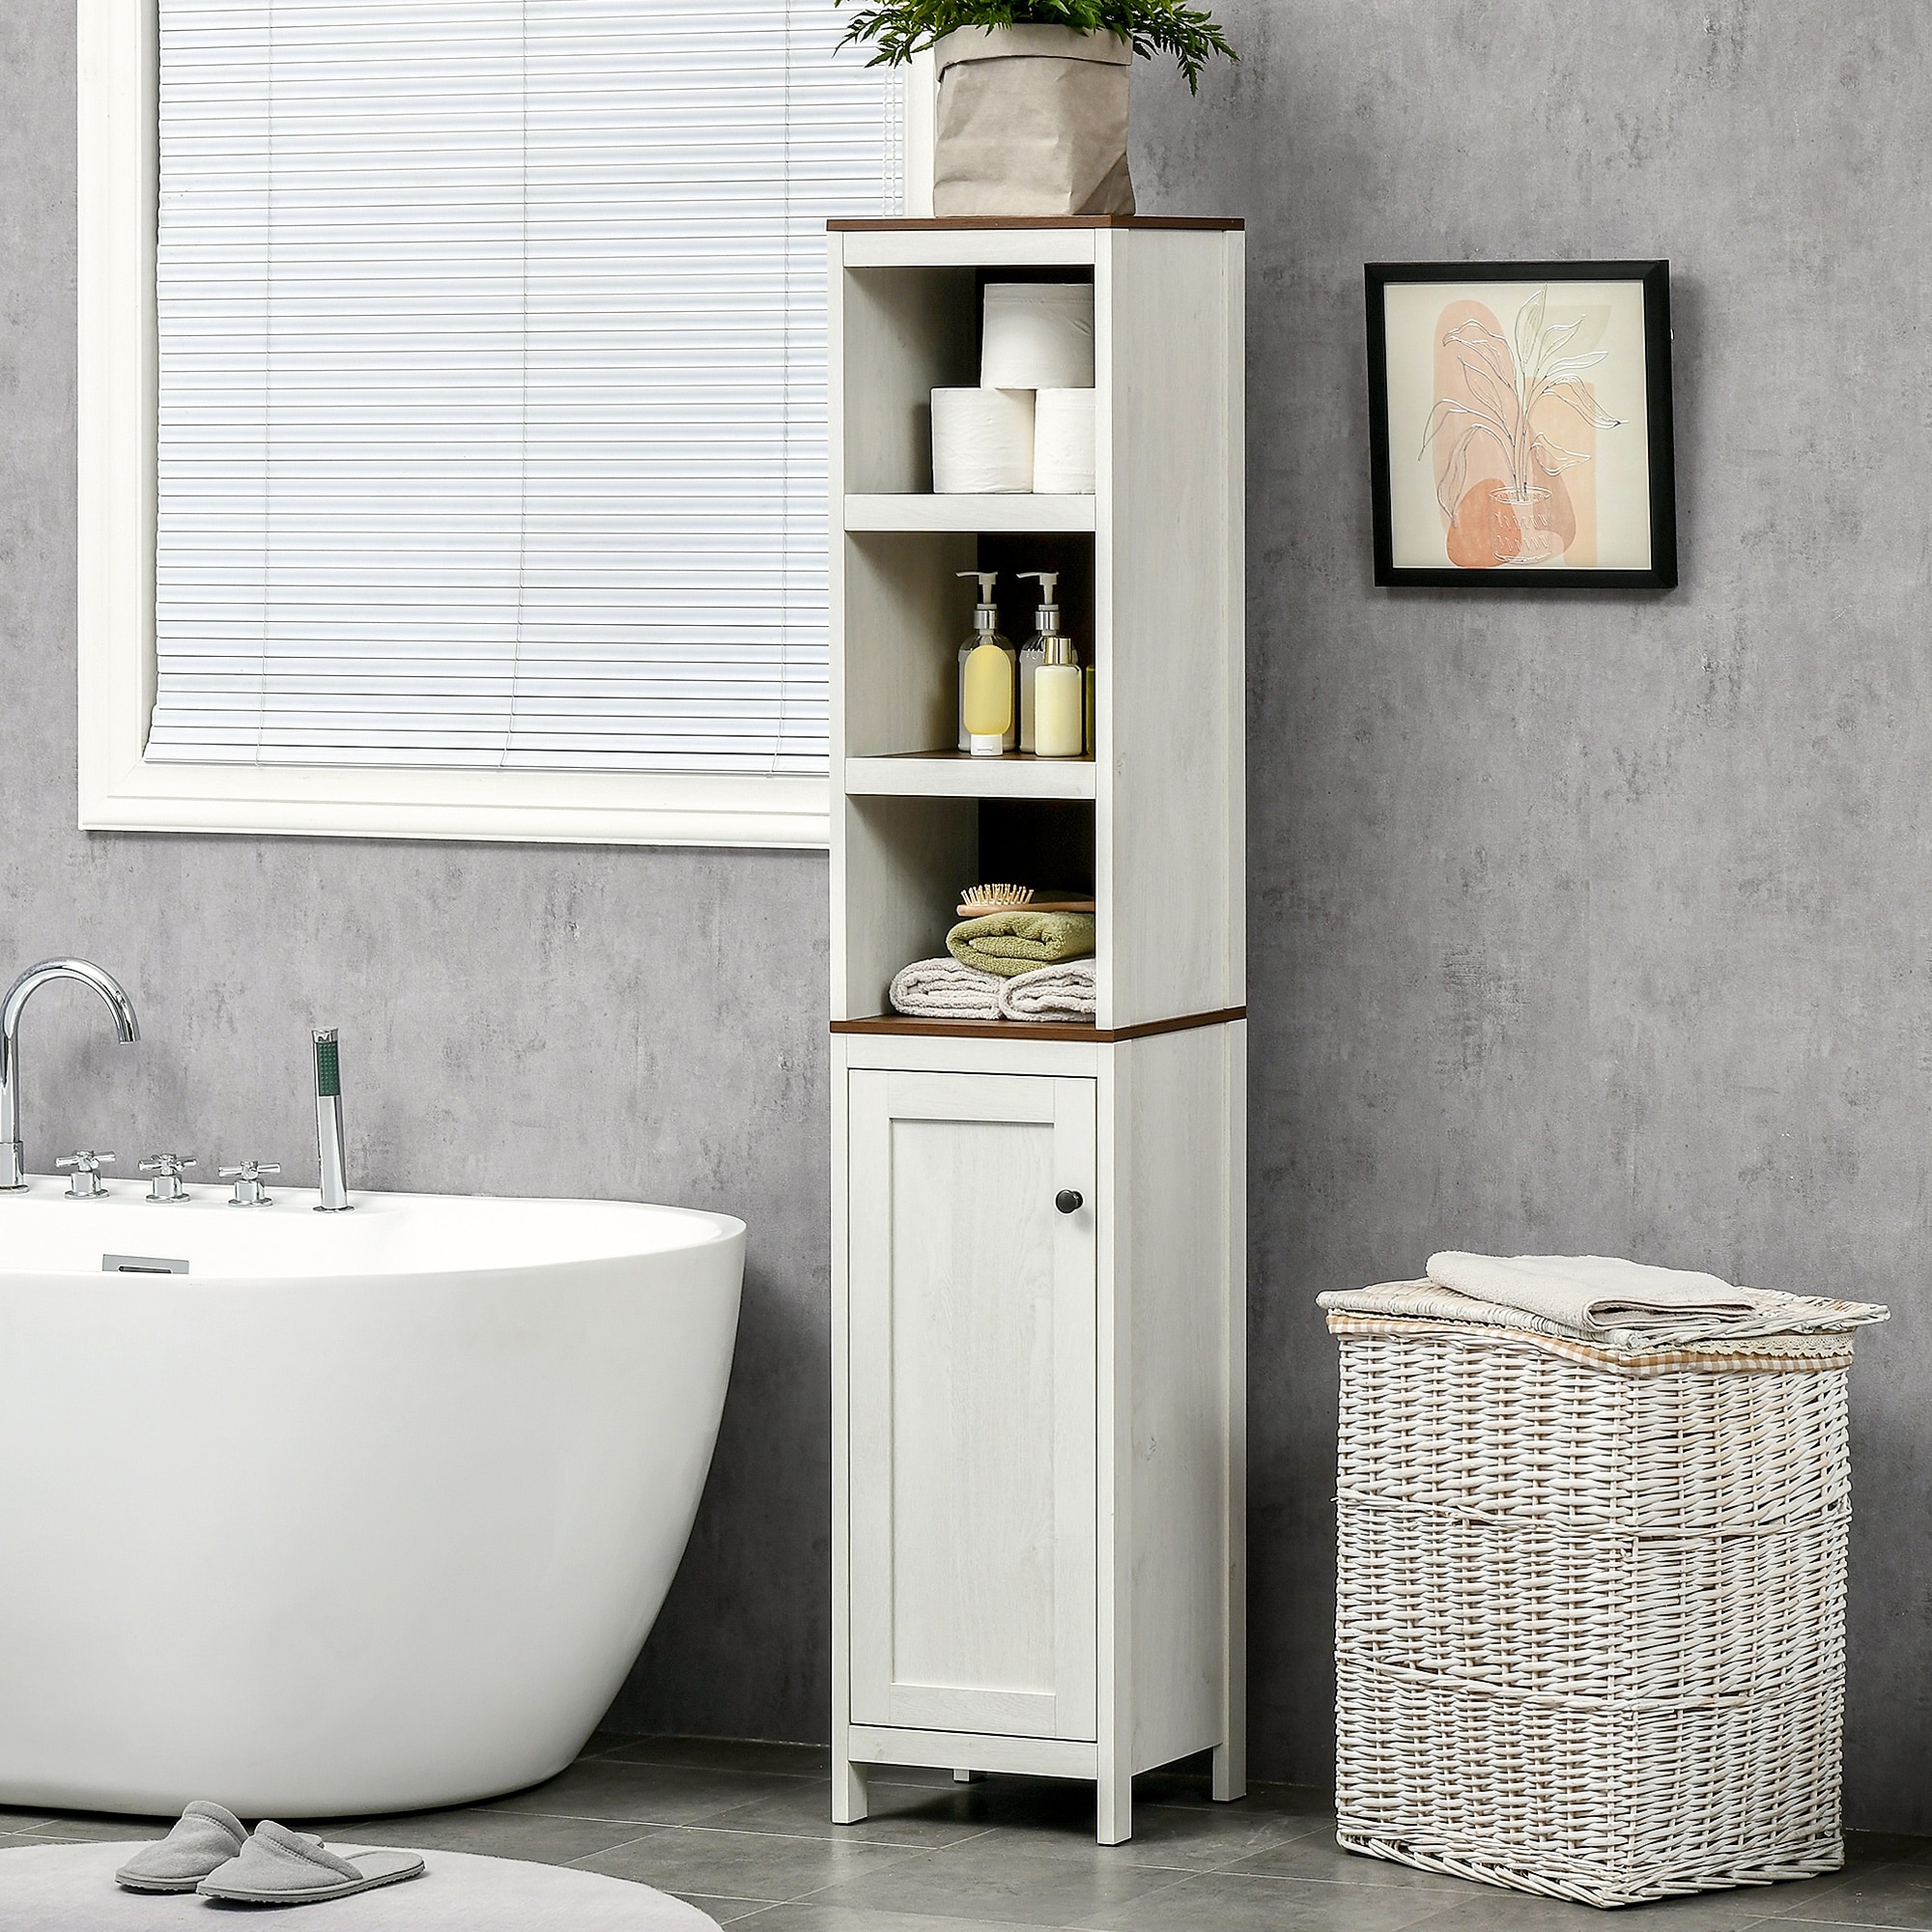 https://ak1.ostkcdn.com/images/products/is/images/direct/631a771f2a40633675d1276c5b6cff63a3b5c4bf/kleankin-Tall-Bathroom-Storage-Cabinet%2C-Freestanding-Tower-Cabinet-with-3-Open-Shelves-and-Adjustable-Shelf%2C-Antique-White.jpg